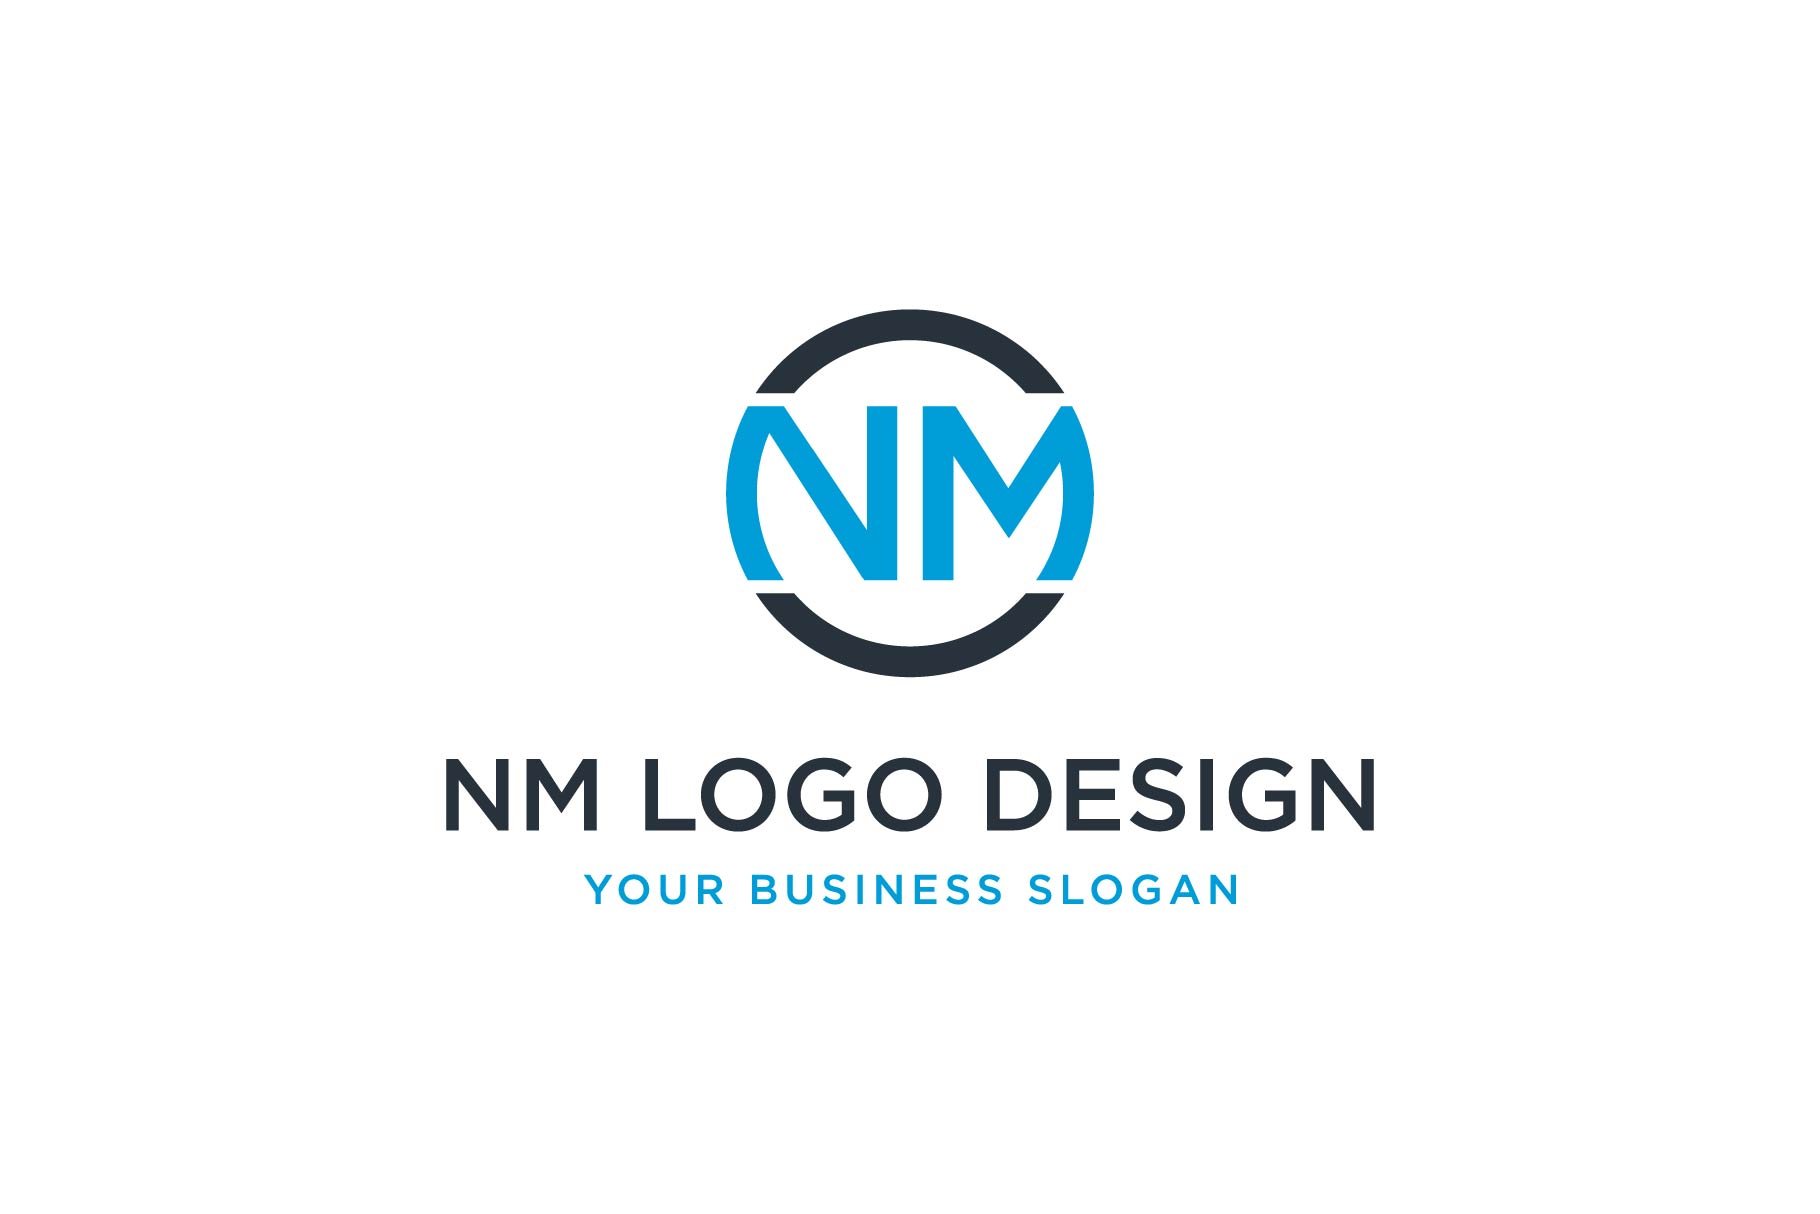 New Mexico United Logo PNG vector in SVG, PDF, AI, CDR format